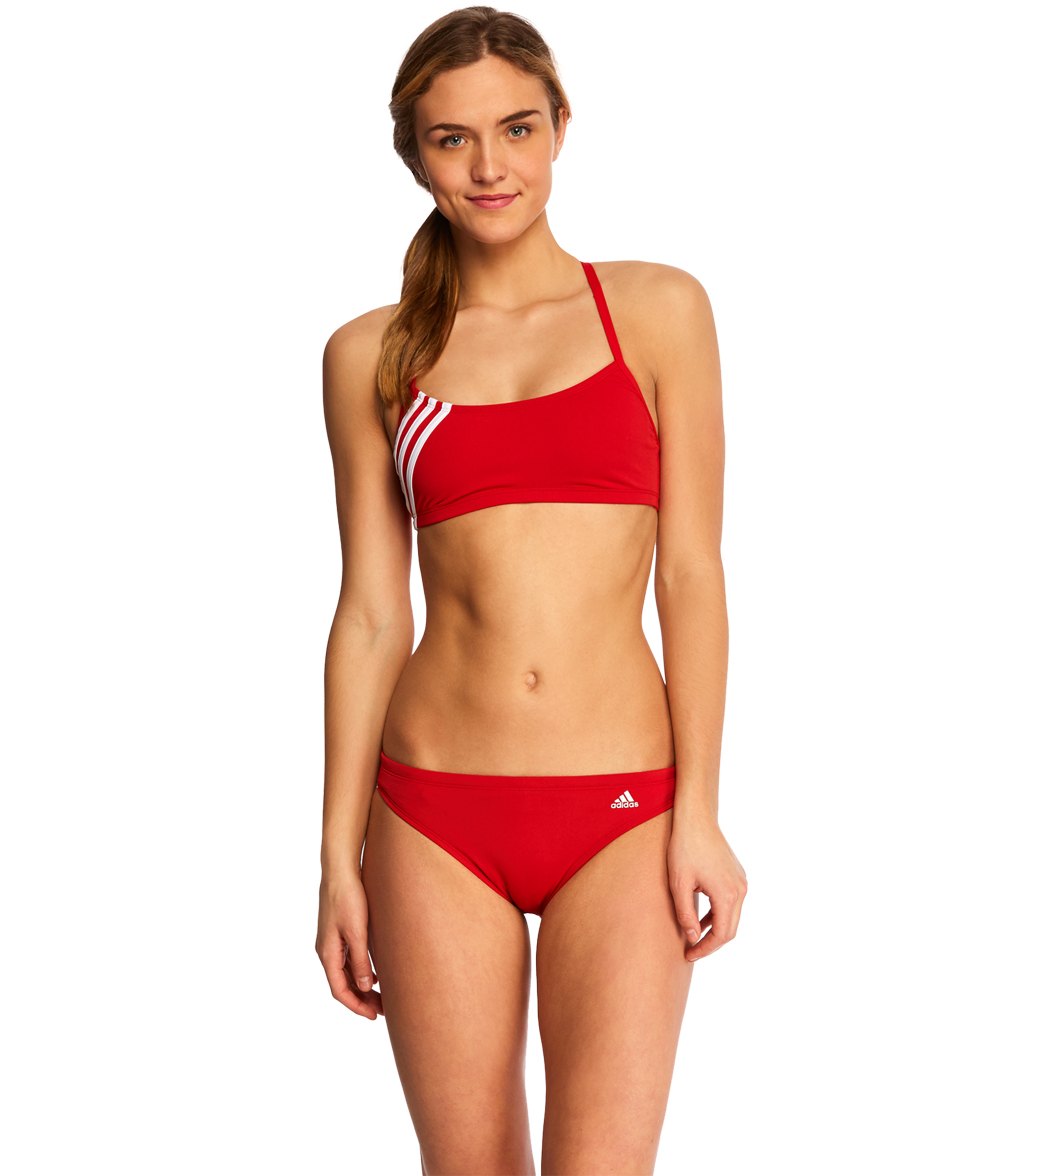 Adidas Solid Scoop 2-Piece Swimsuit at SwimOutlet.com